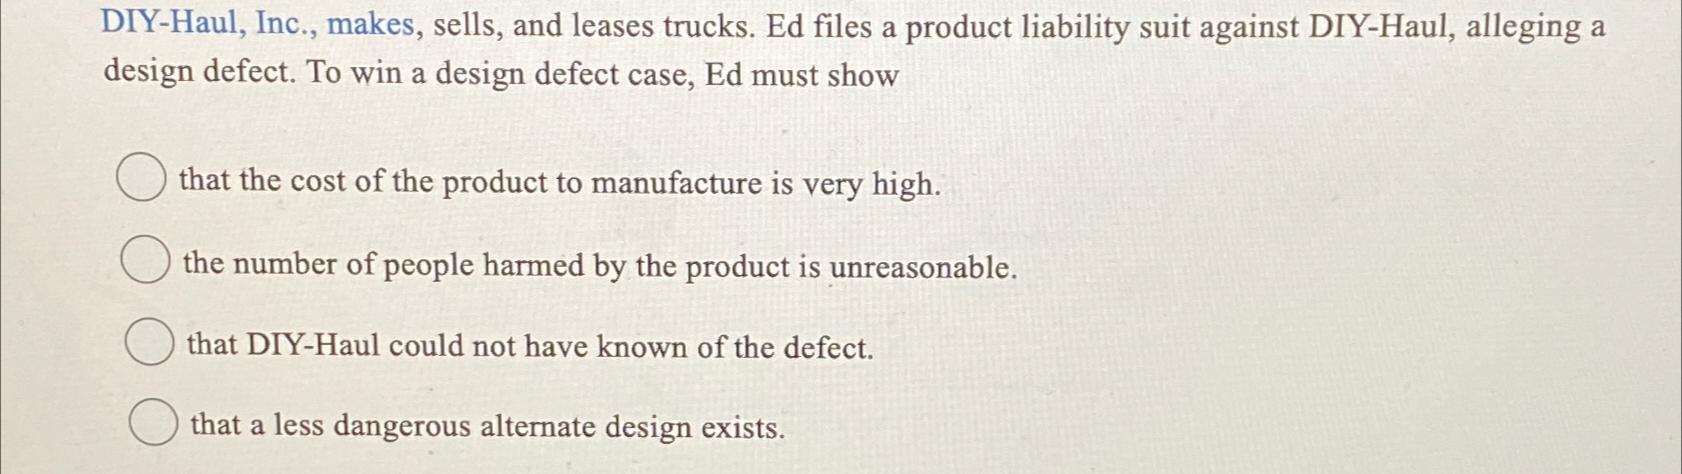 DIY-Haul, Inc., makes, sells, and leases trucks. Ed files a product liability suit against DIY-Haul, alleging